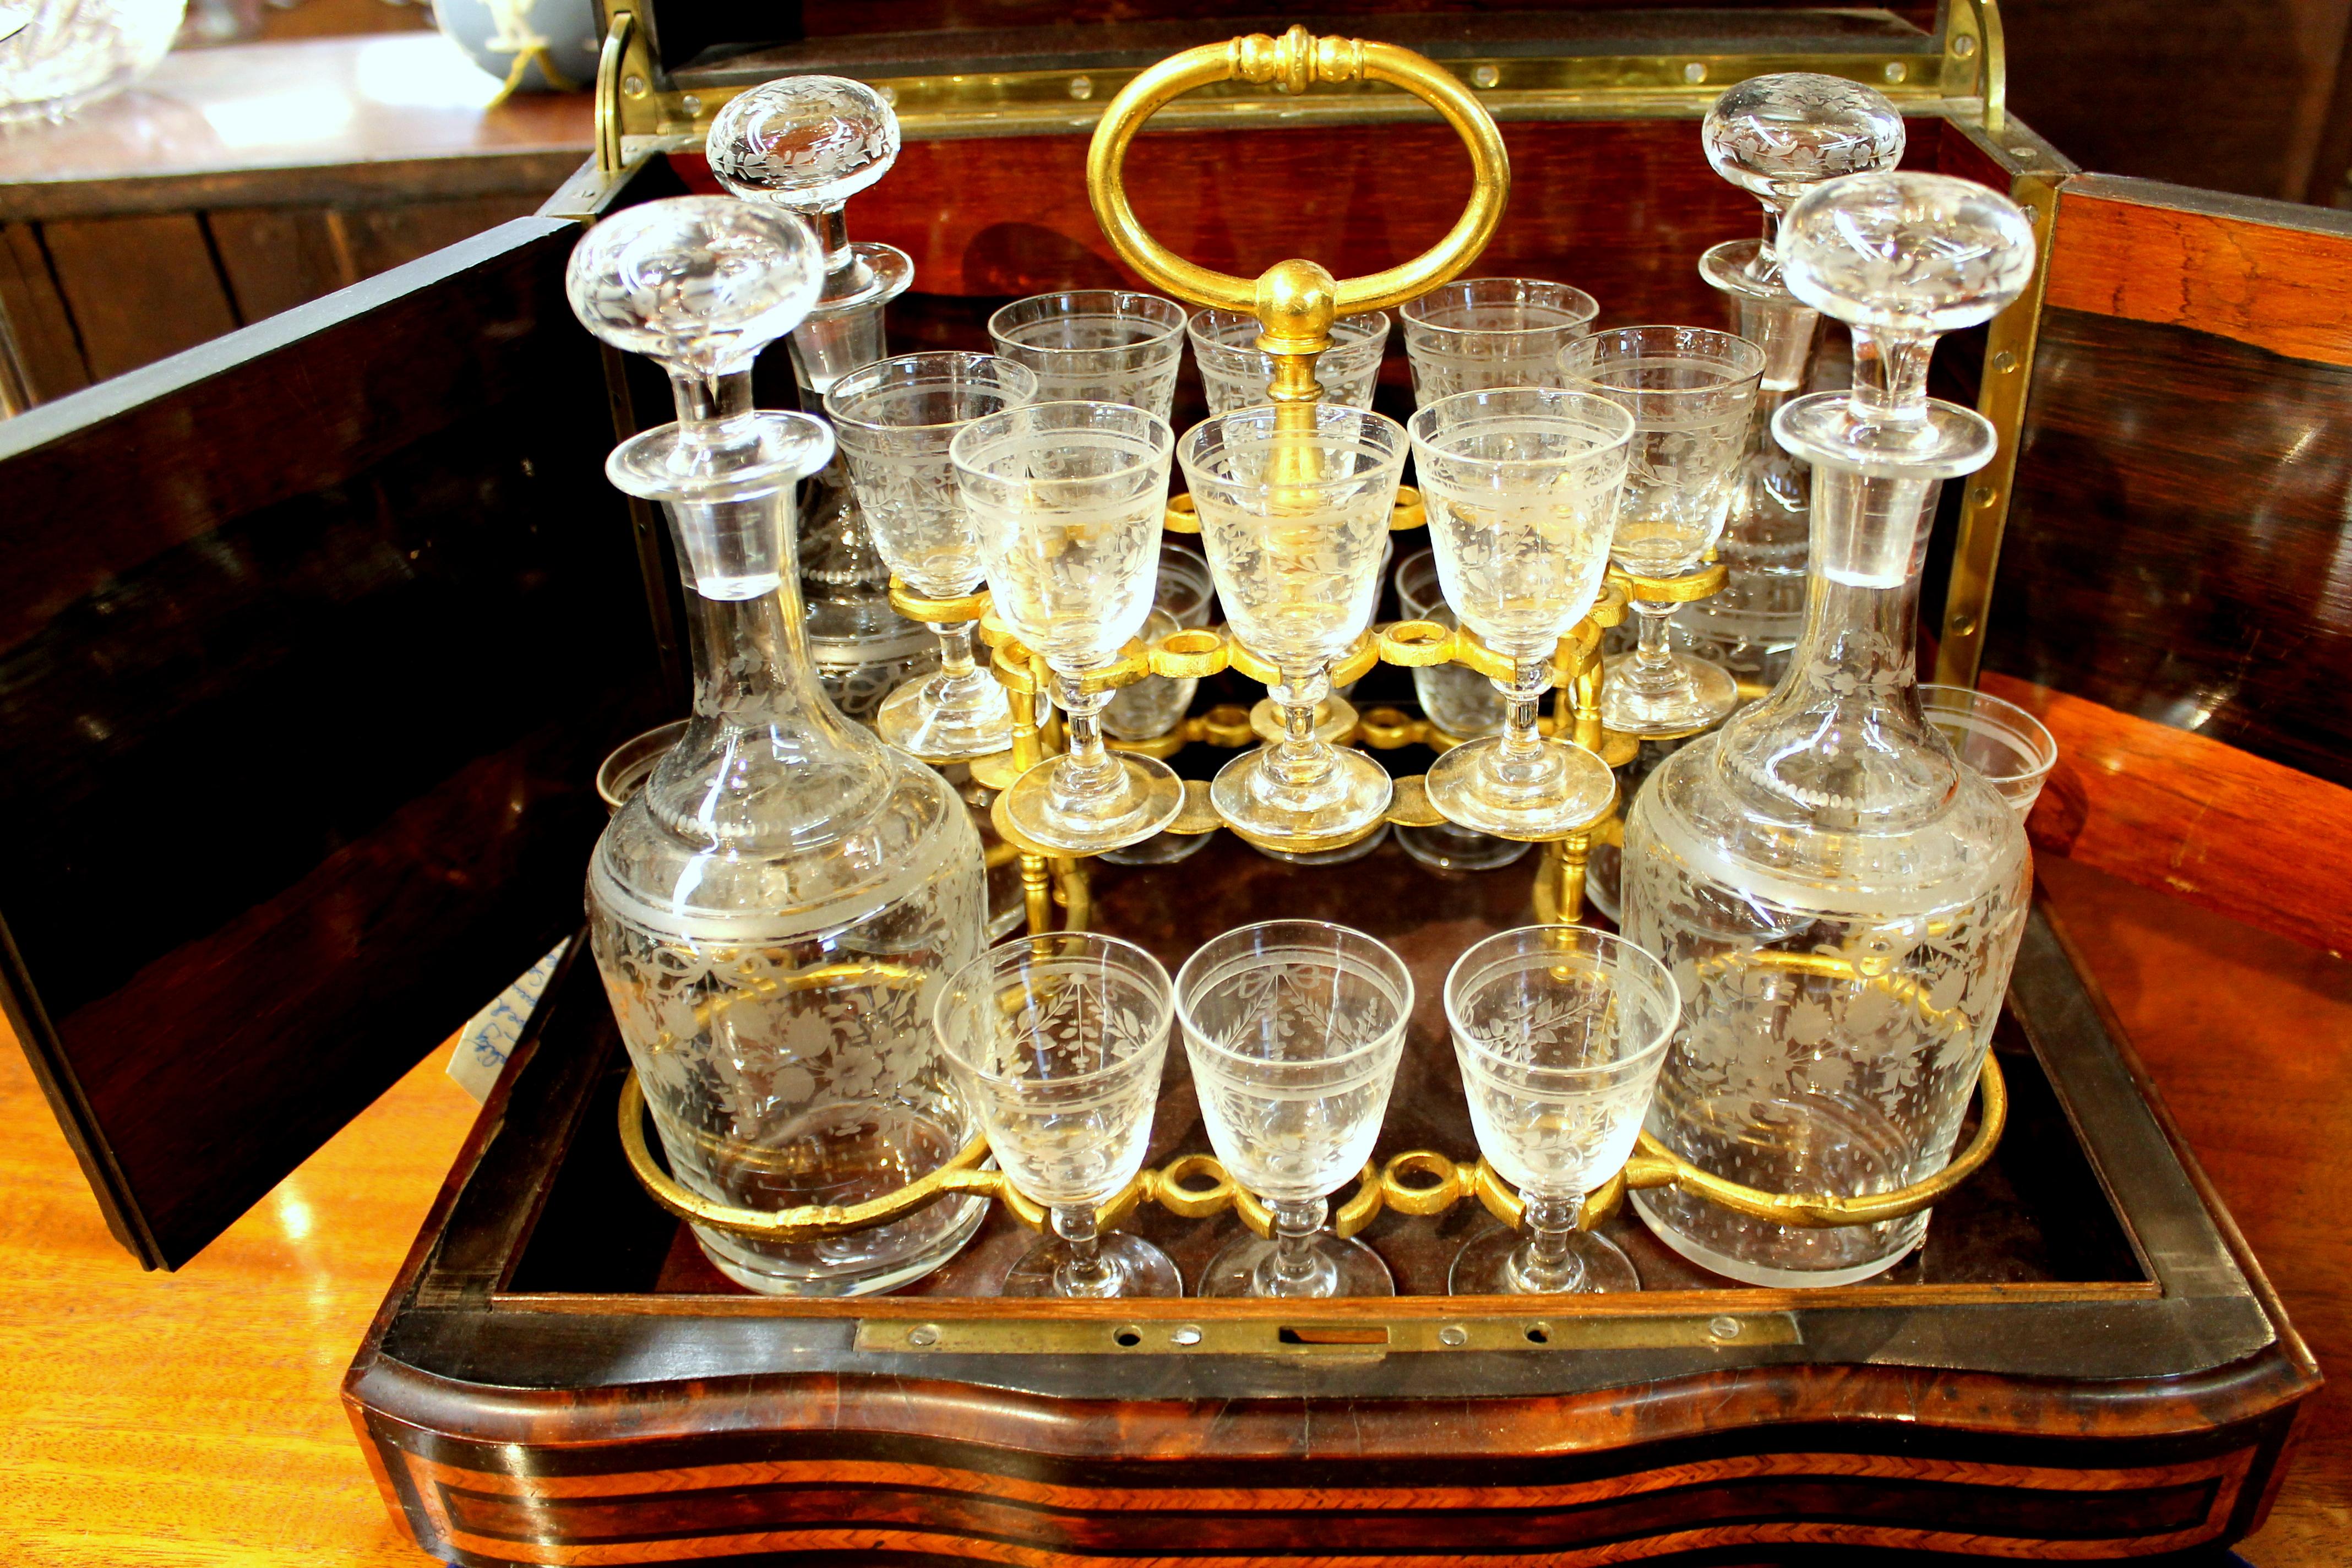 Extraordinary quality antique French 24-piece hand engraved crystal cave a' liqueur (Cordial or Liqueur) Tantalus set with magnificent inlaid amboyna wood and kingwood inlaid hinged case.
This is extremely rare in that the exquisite hand engraved